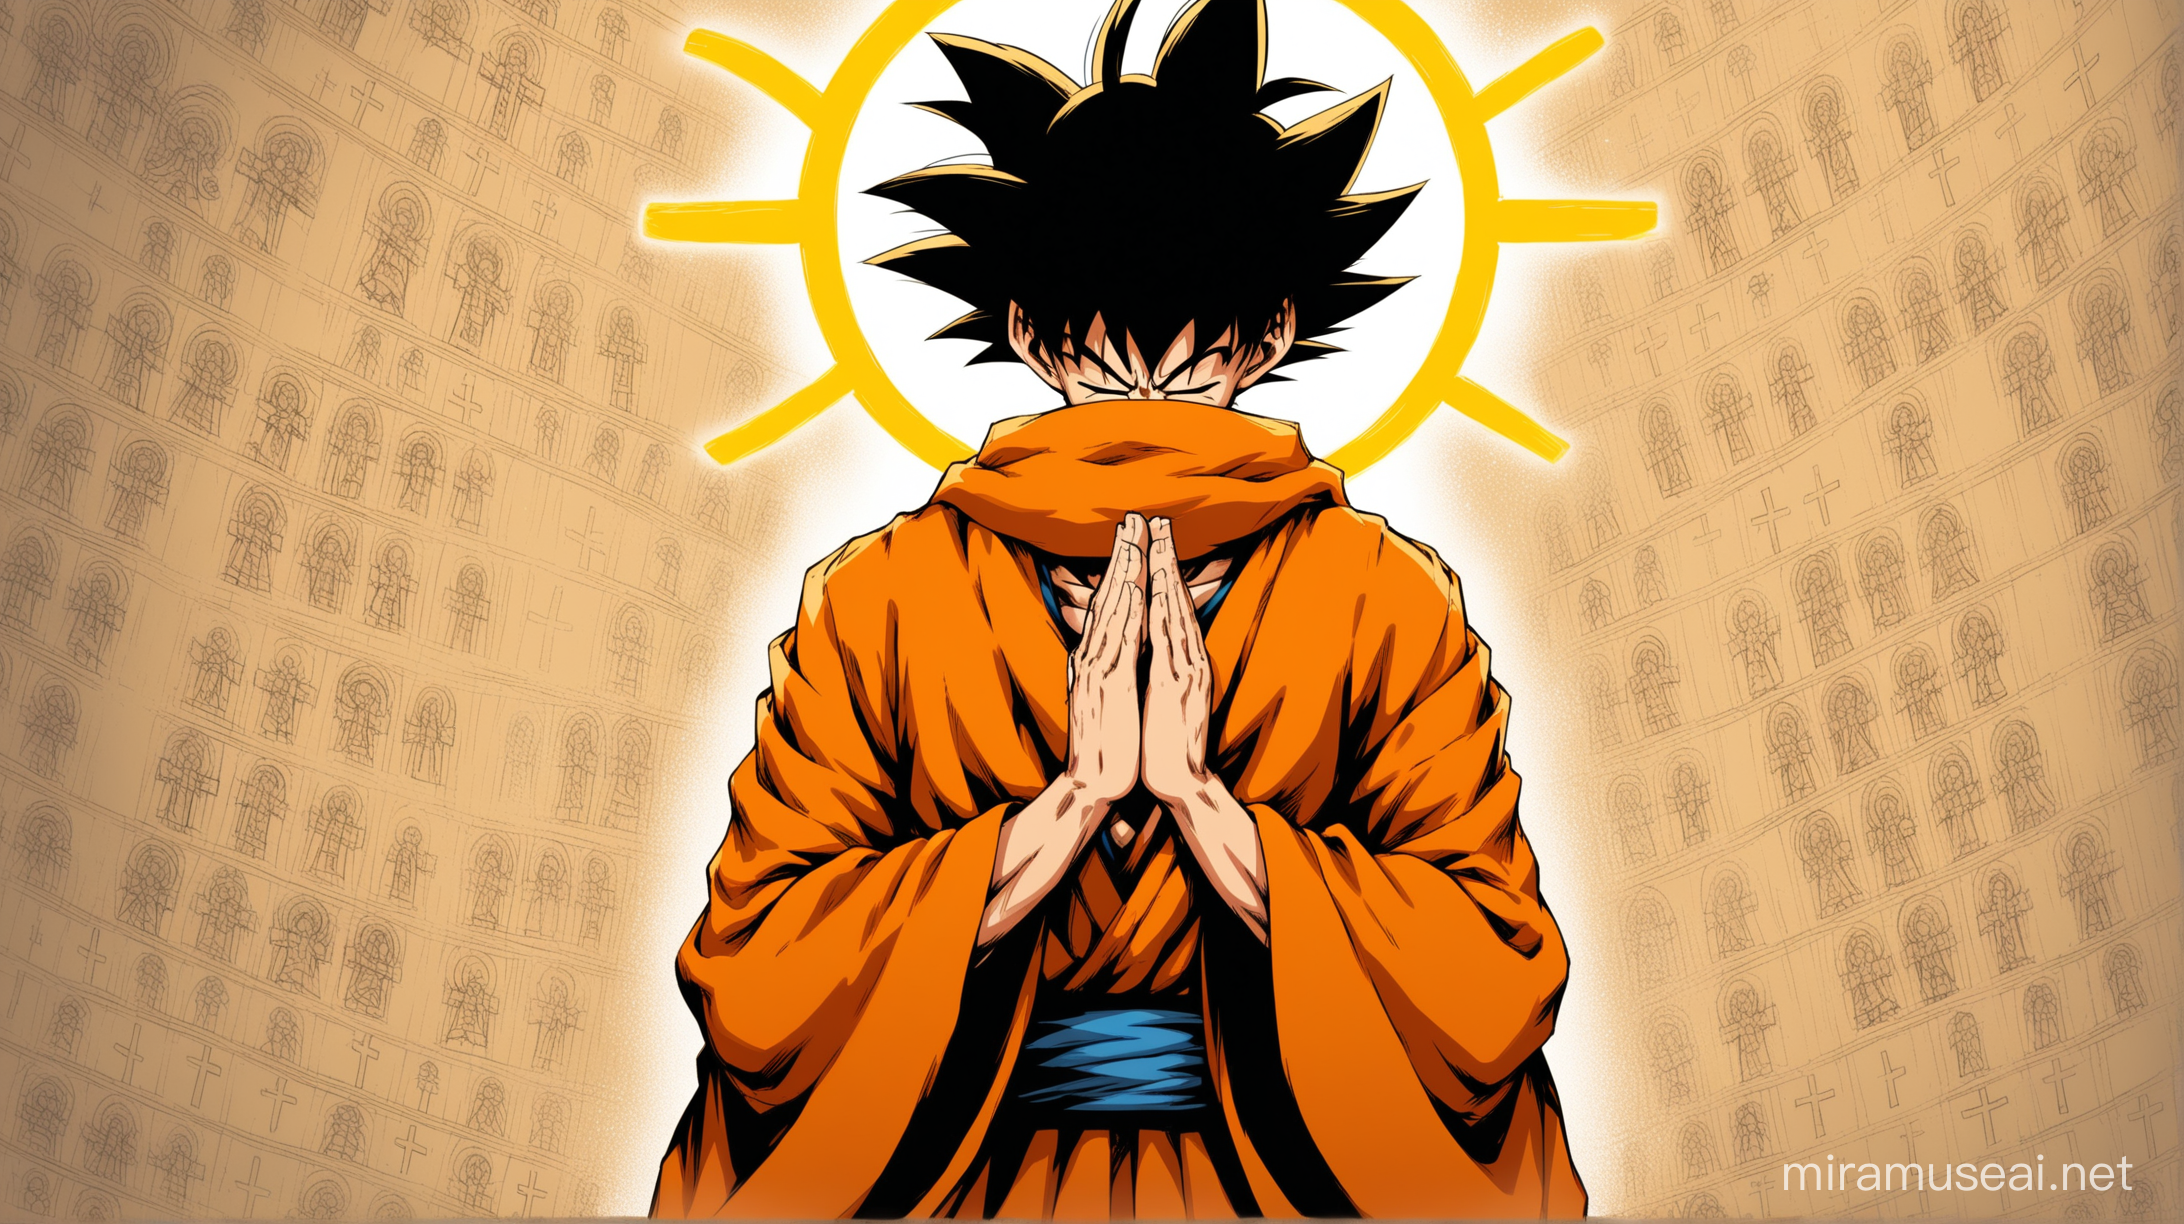 Goku with a yellow halo praying, he has a ancient robe full of crosses drawings over it